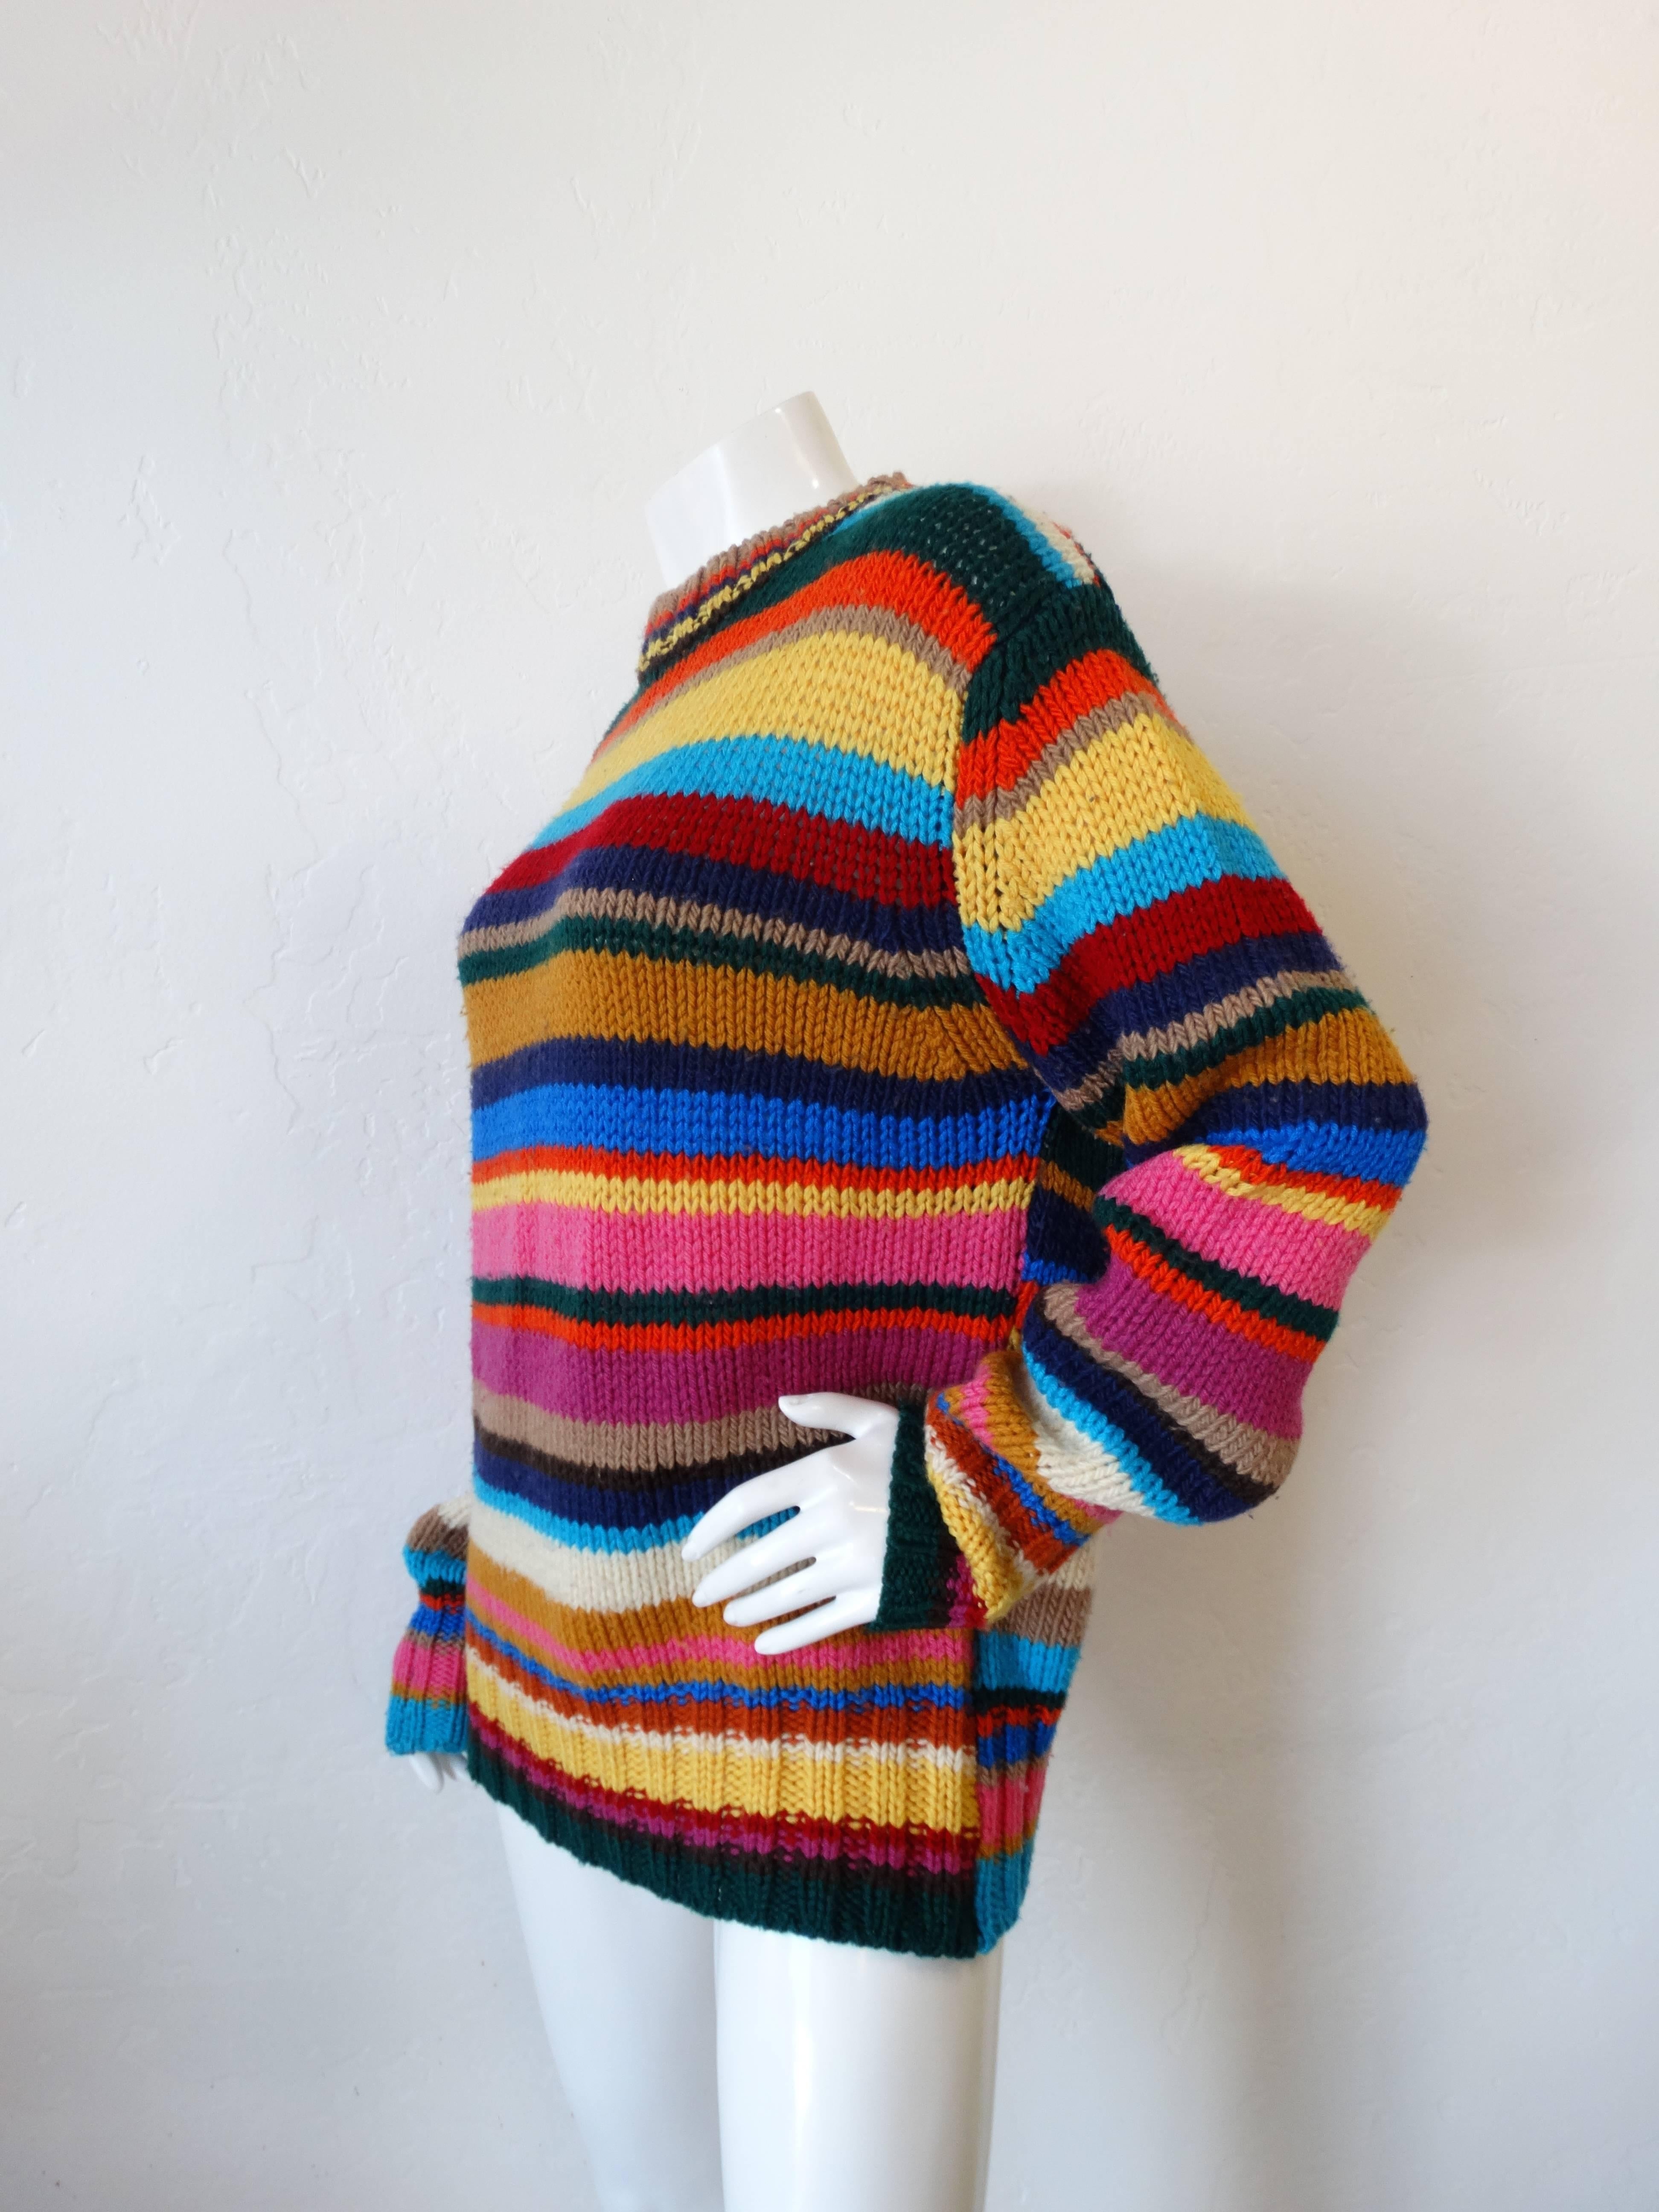 Dolce & Gabanna sweater is knitted with acrylic and pure virgin laine (wool) creating a sumptuous contrast of textures. The retro-inspired red, yellow, turquoise and pink stripes call to mind the style maven's love of vintage and pieces worn by